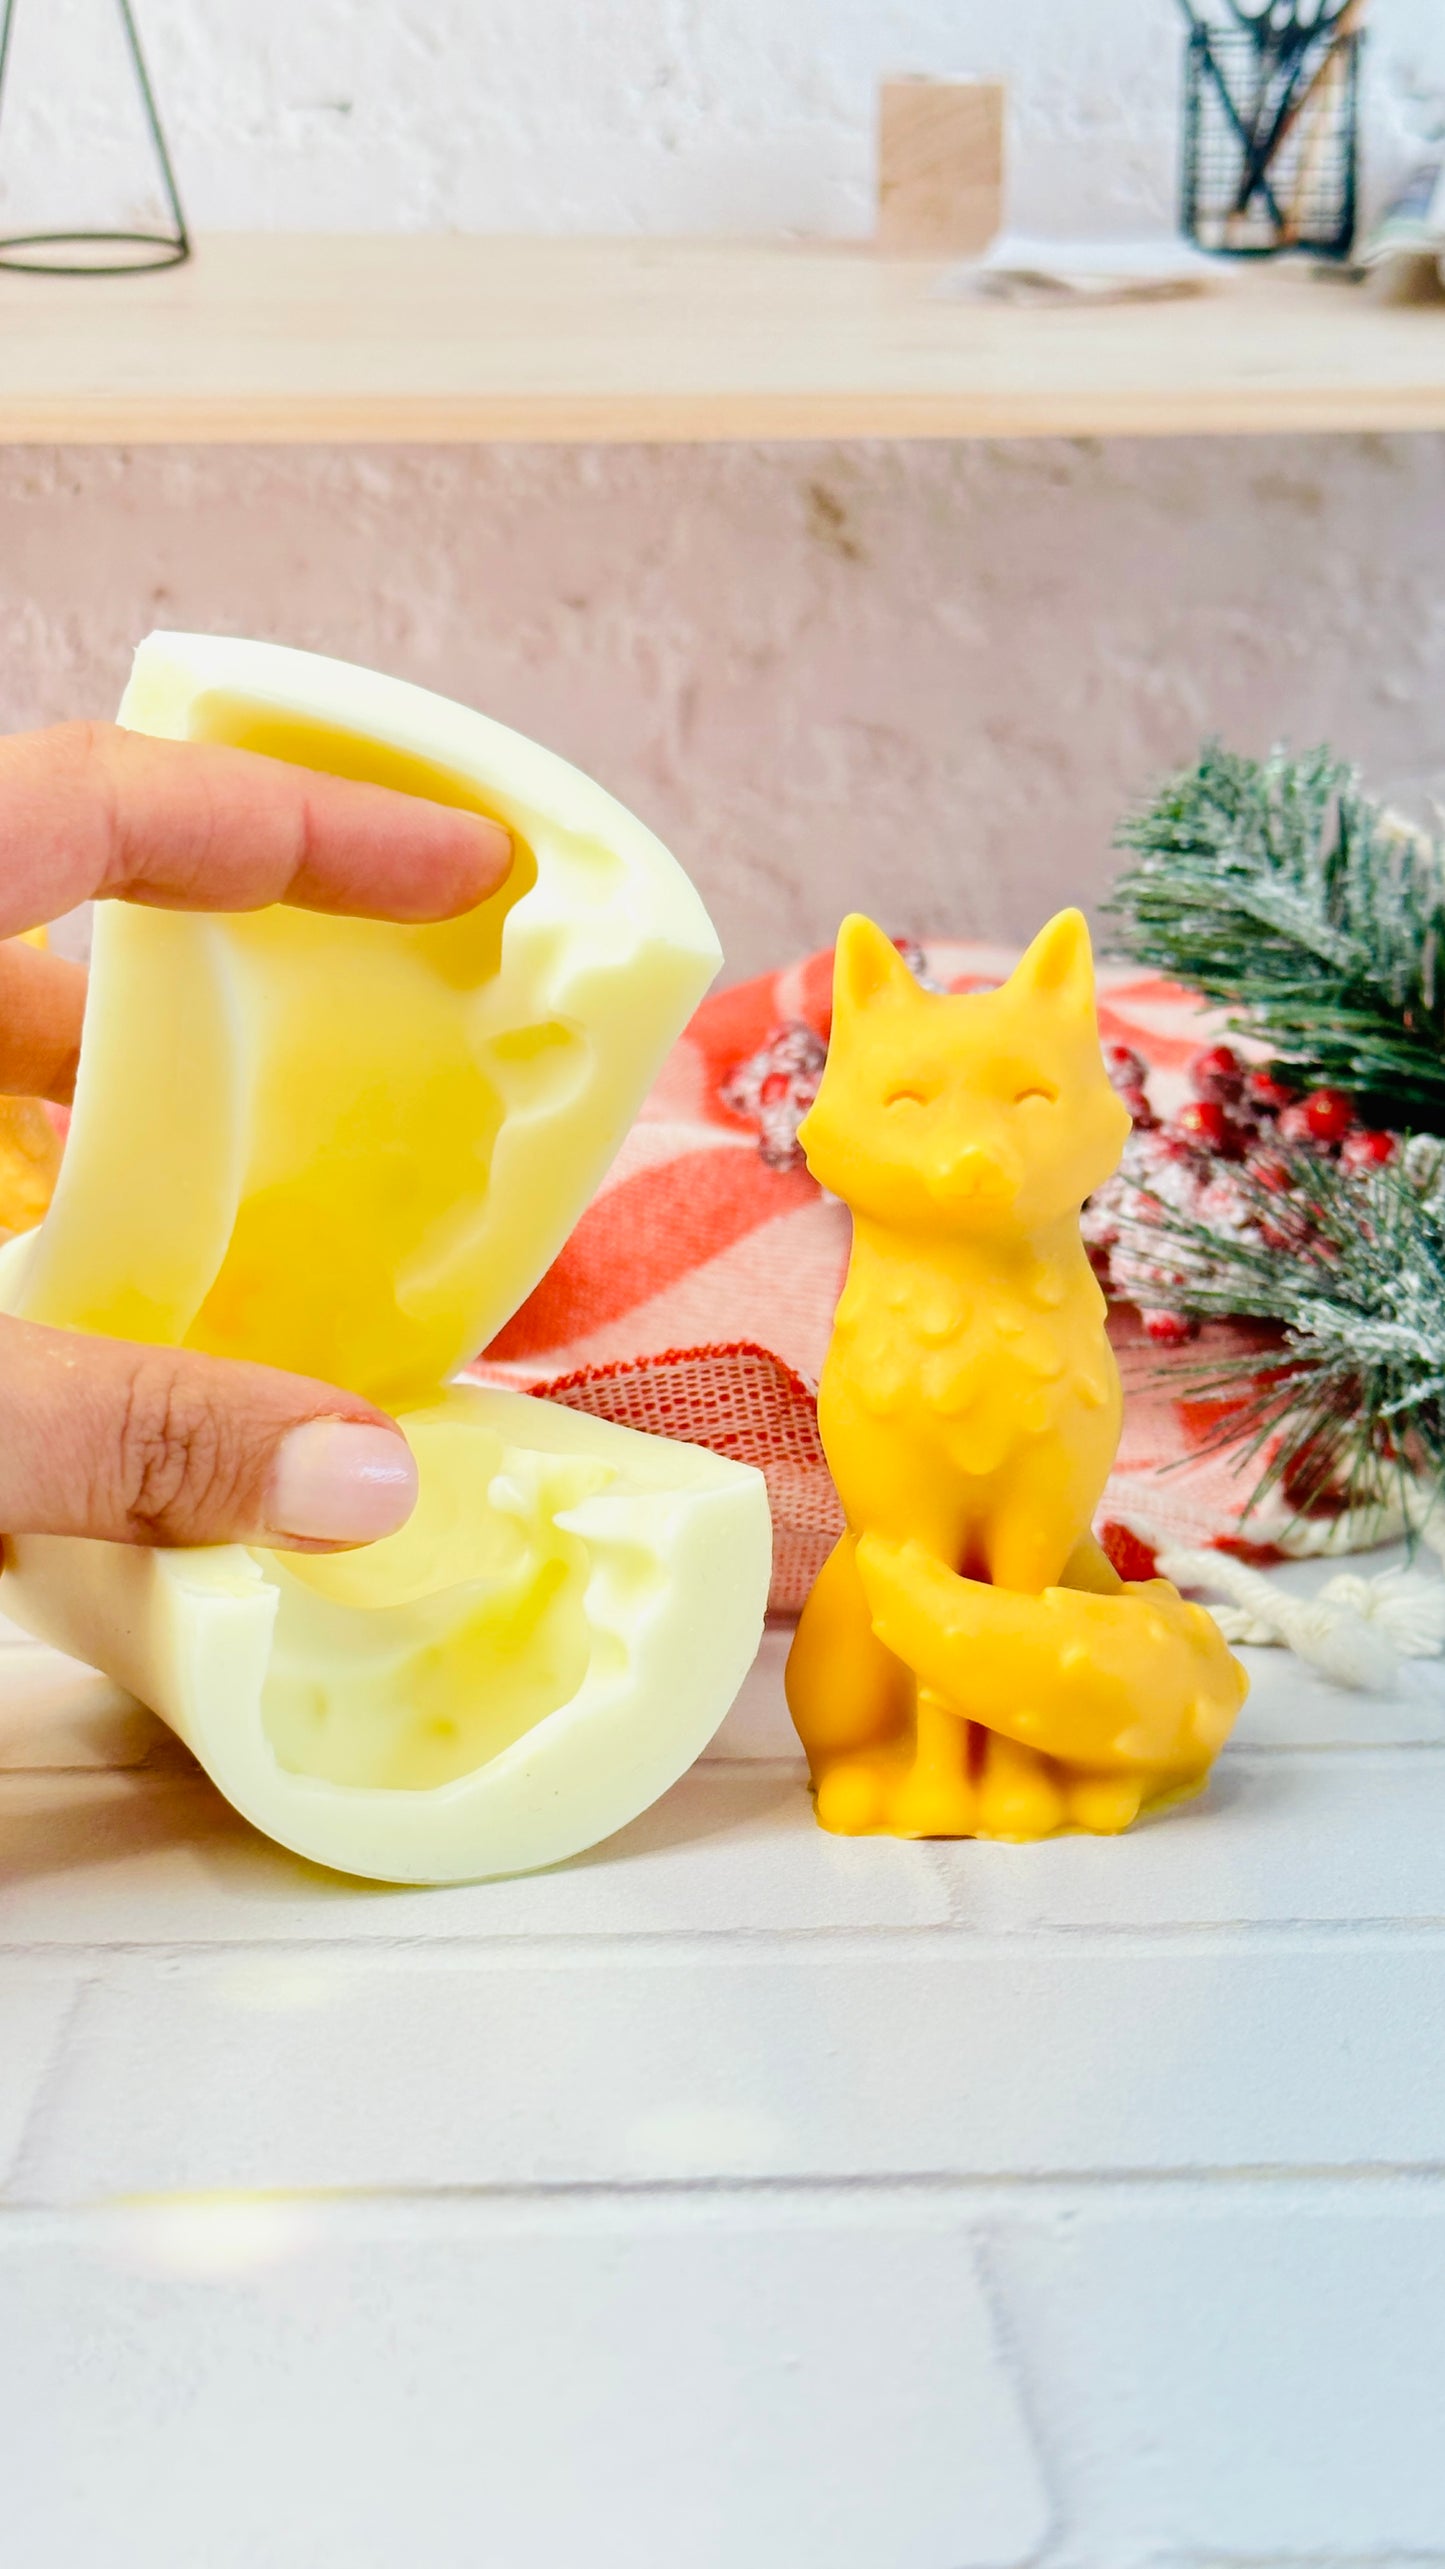 Fox Silicone Mold - Create Stunning Fox-Shaped Candles